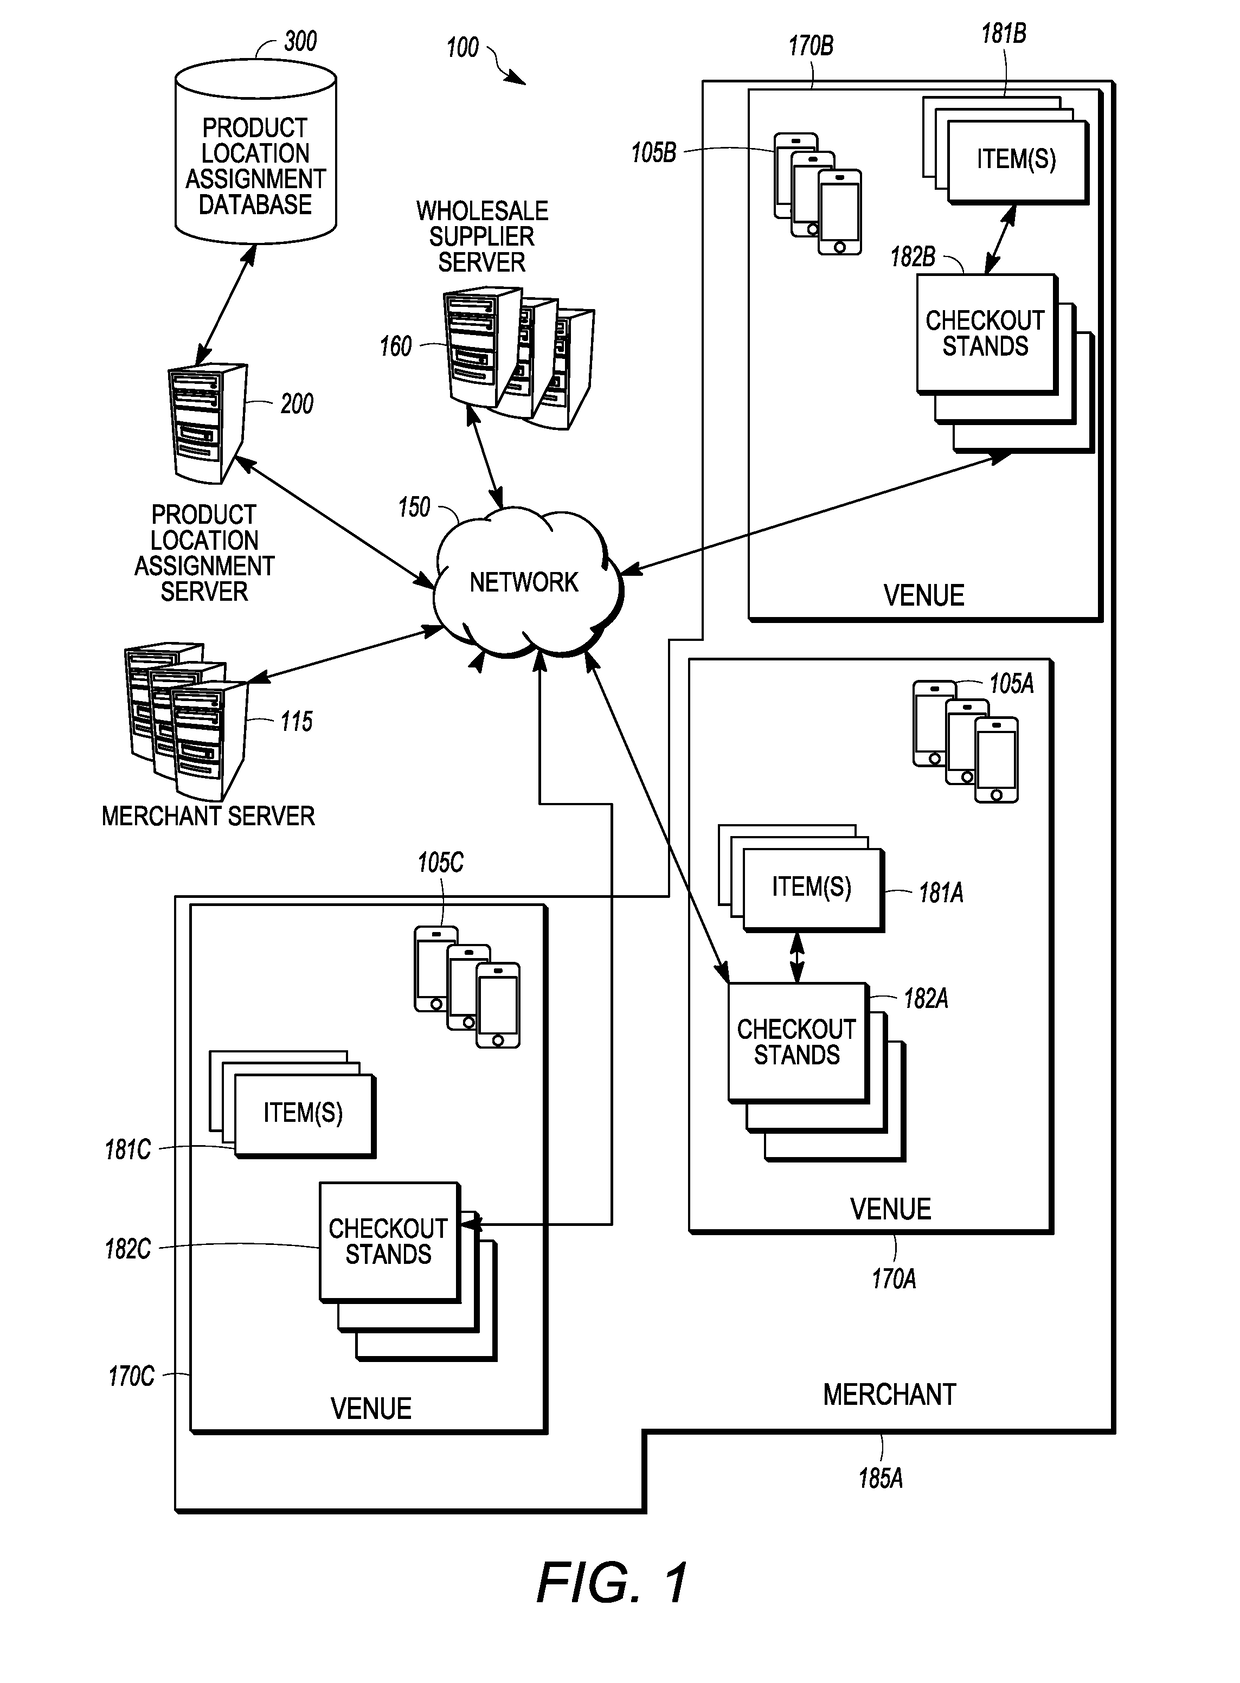 Transaction based location assignment system and method